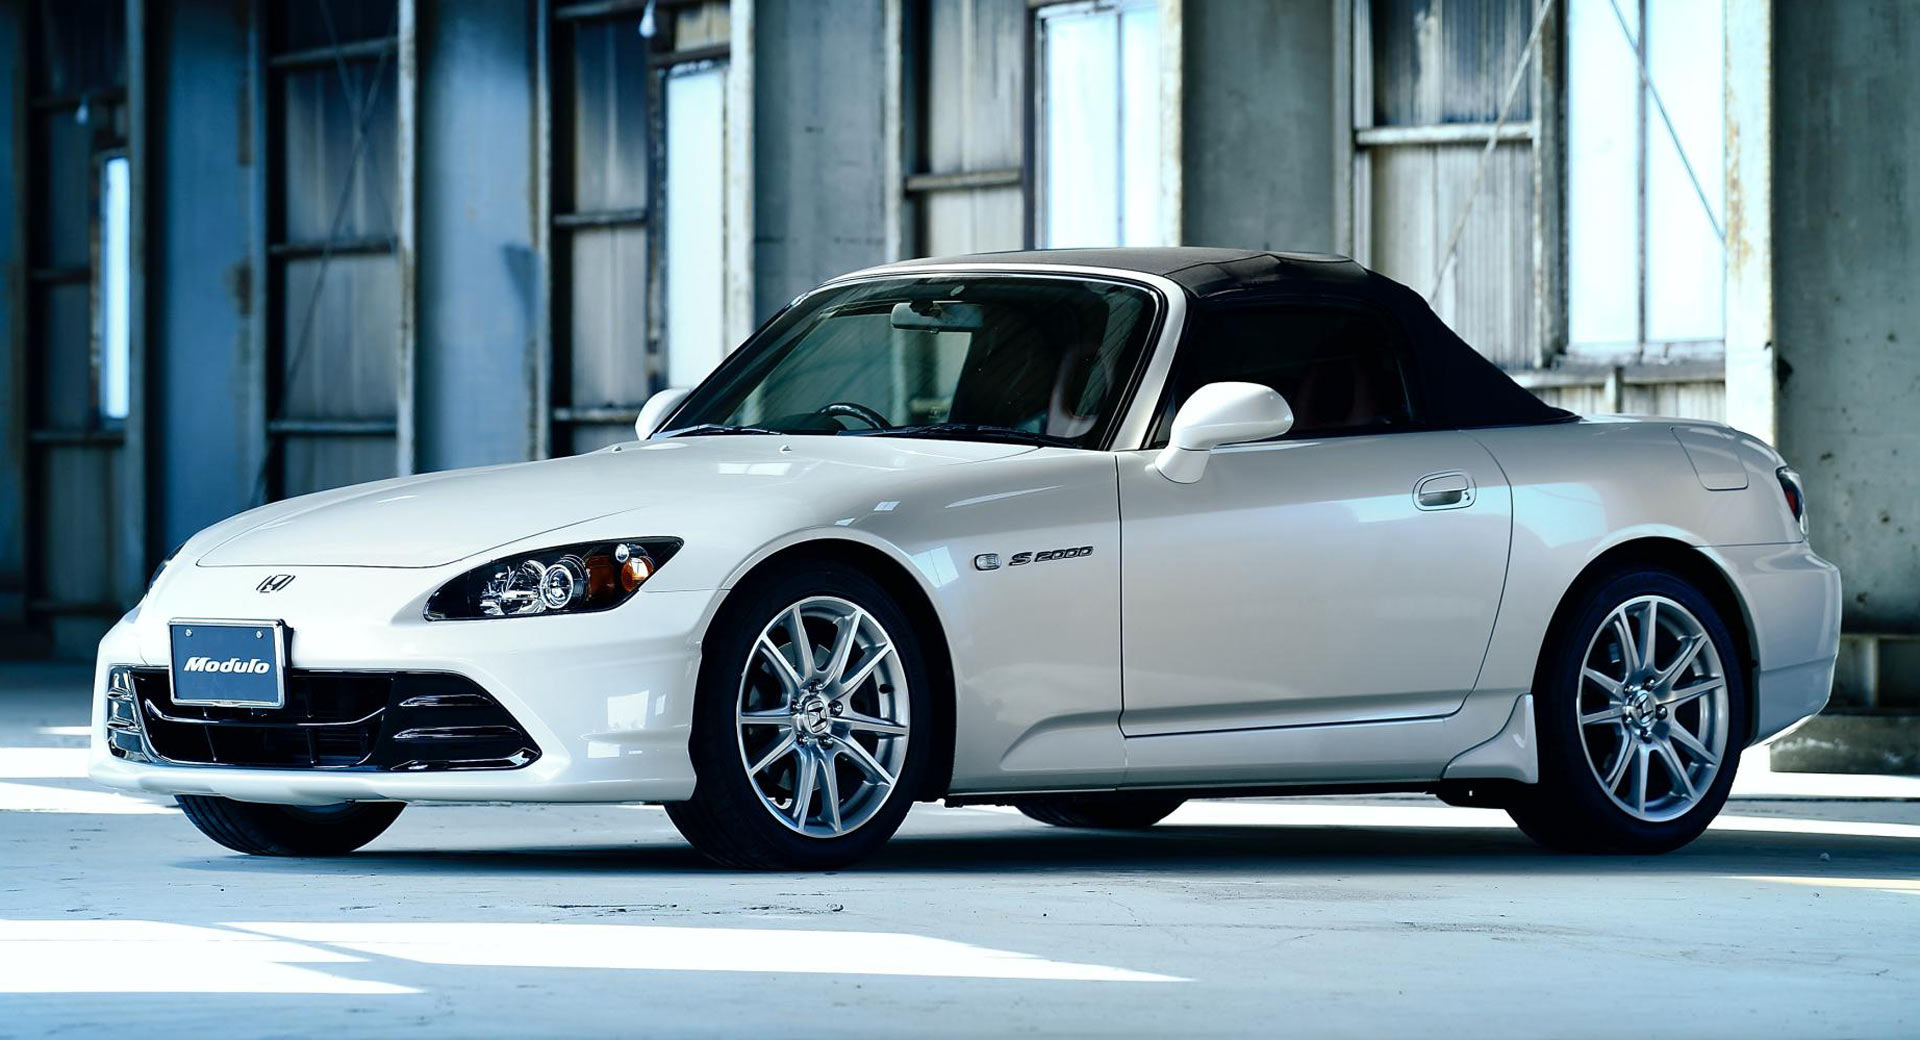 Honda To Start Reproducing S2000 Parts, Asks Customers What They Want